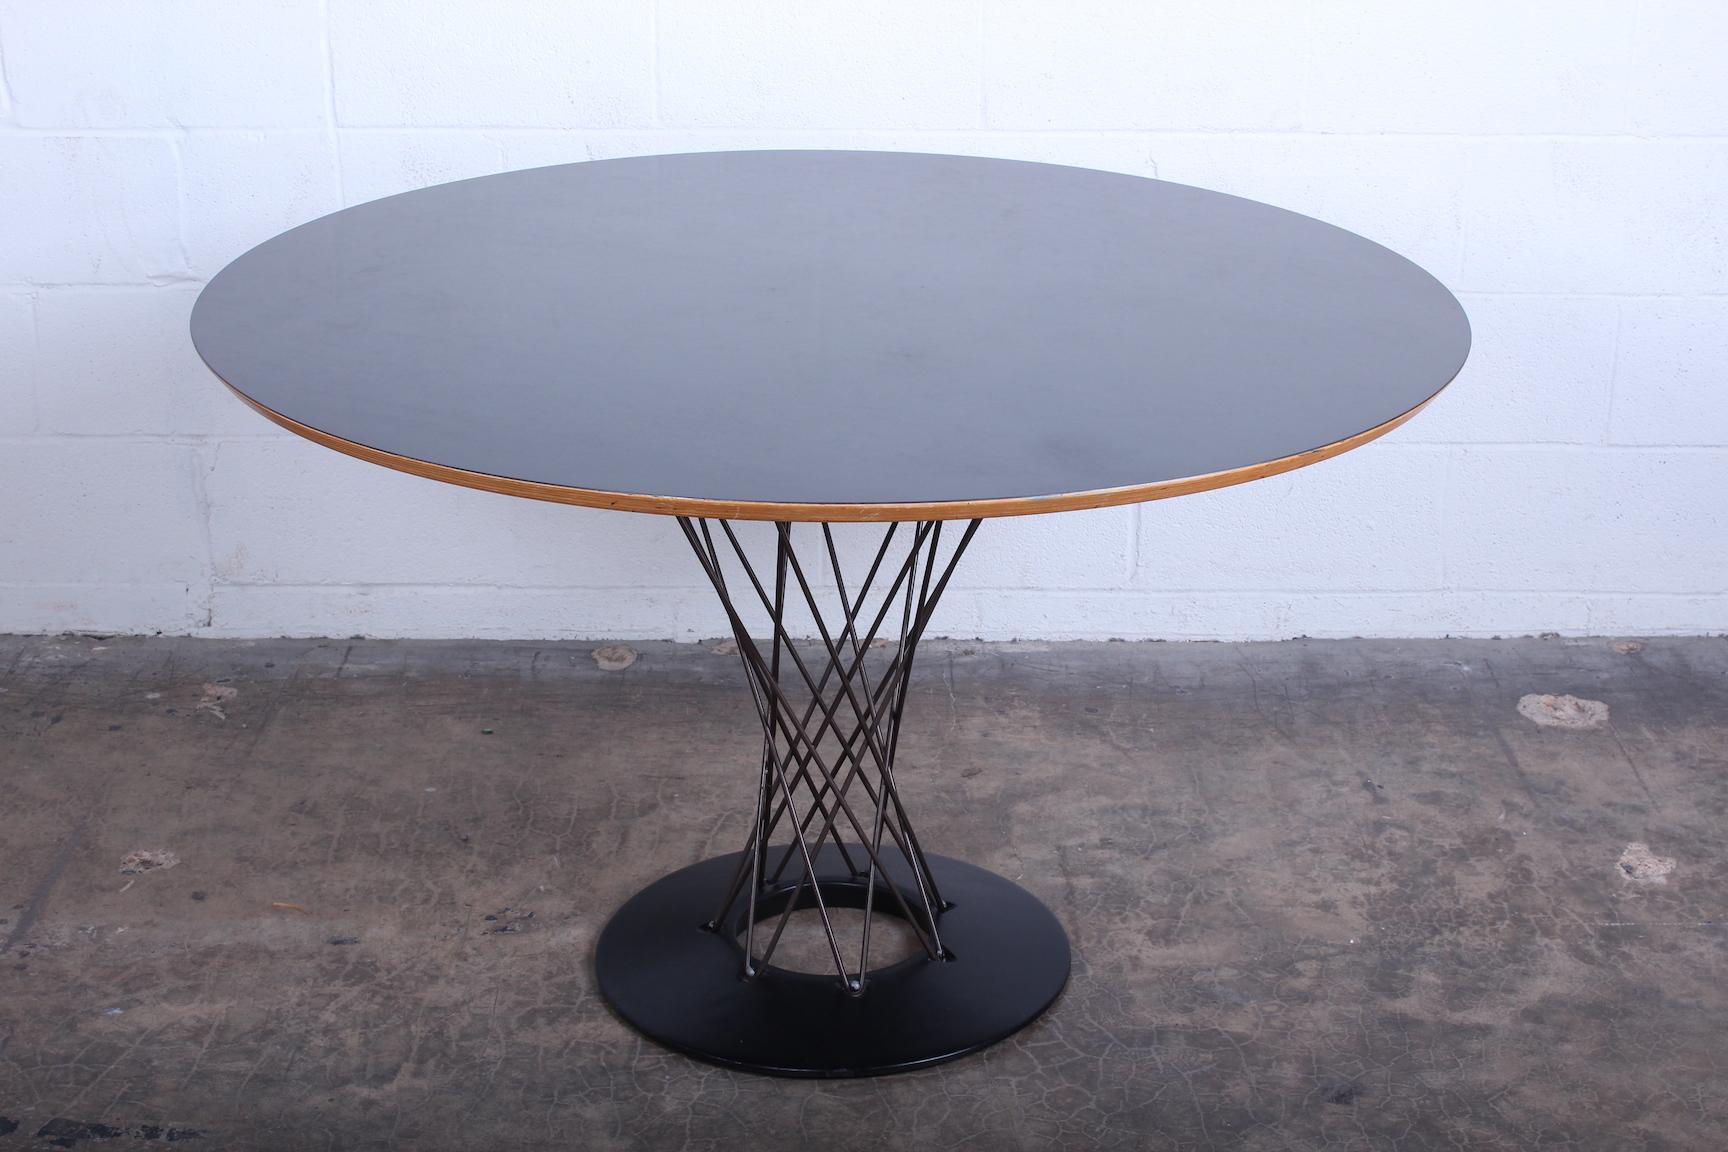 A cyclone table with black laminate top designed by Isamu Noguchi for Knoll.